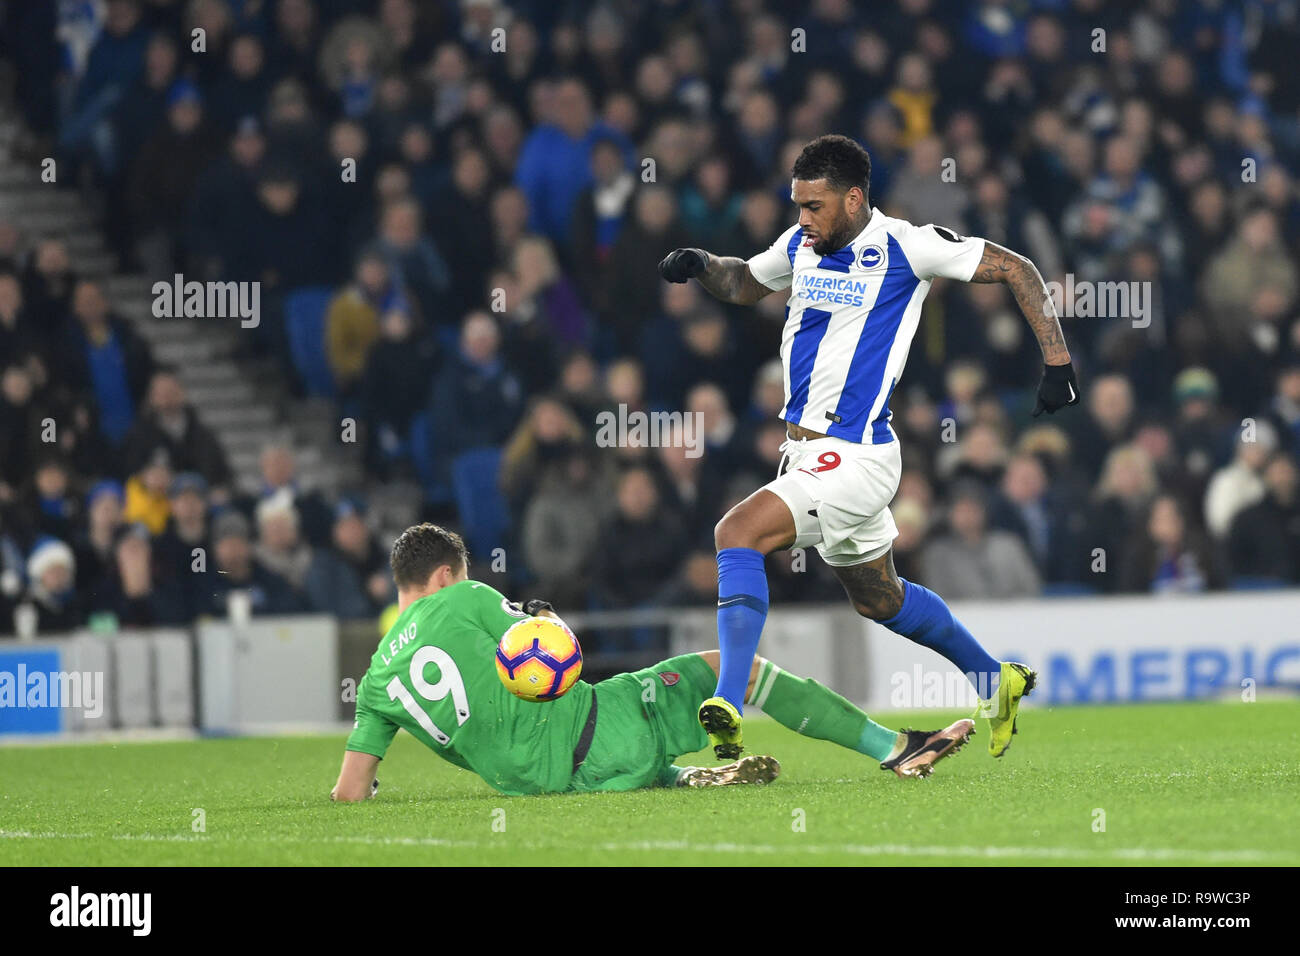 Jurgen Locadia of Brighton goes round Bernd Leno of Arsenal to score the first half equaliser during the Premier League match between Brighton & Hove Albion and Arsenal at the American Express Community Stadium. 26 December 2018 Editorial use only. No merchandising. For Football images FA and Premier League restrictions apply inc. no internet/mobile usage without FAPL license - for details contact Football Dataco Stock Photo